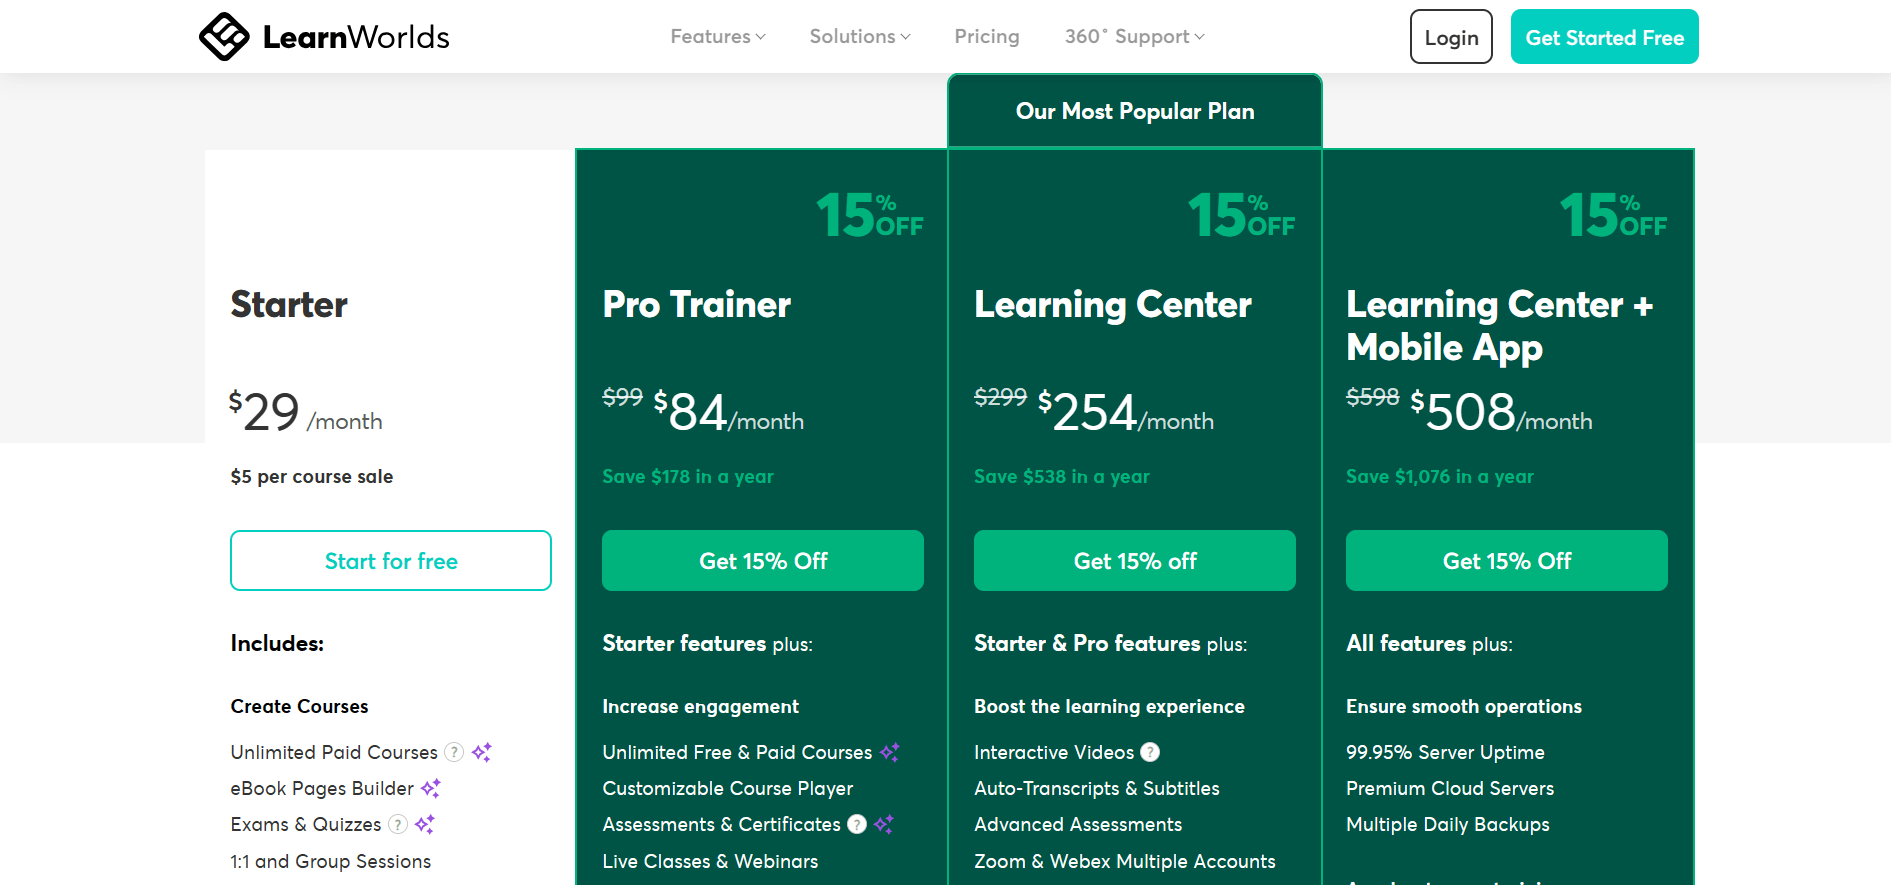 LearnWorlds Pricing Plan: